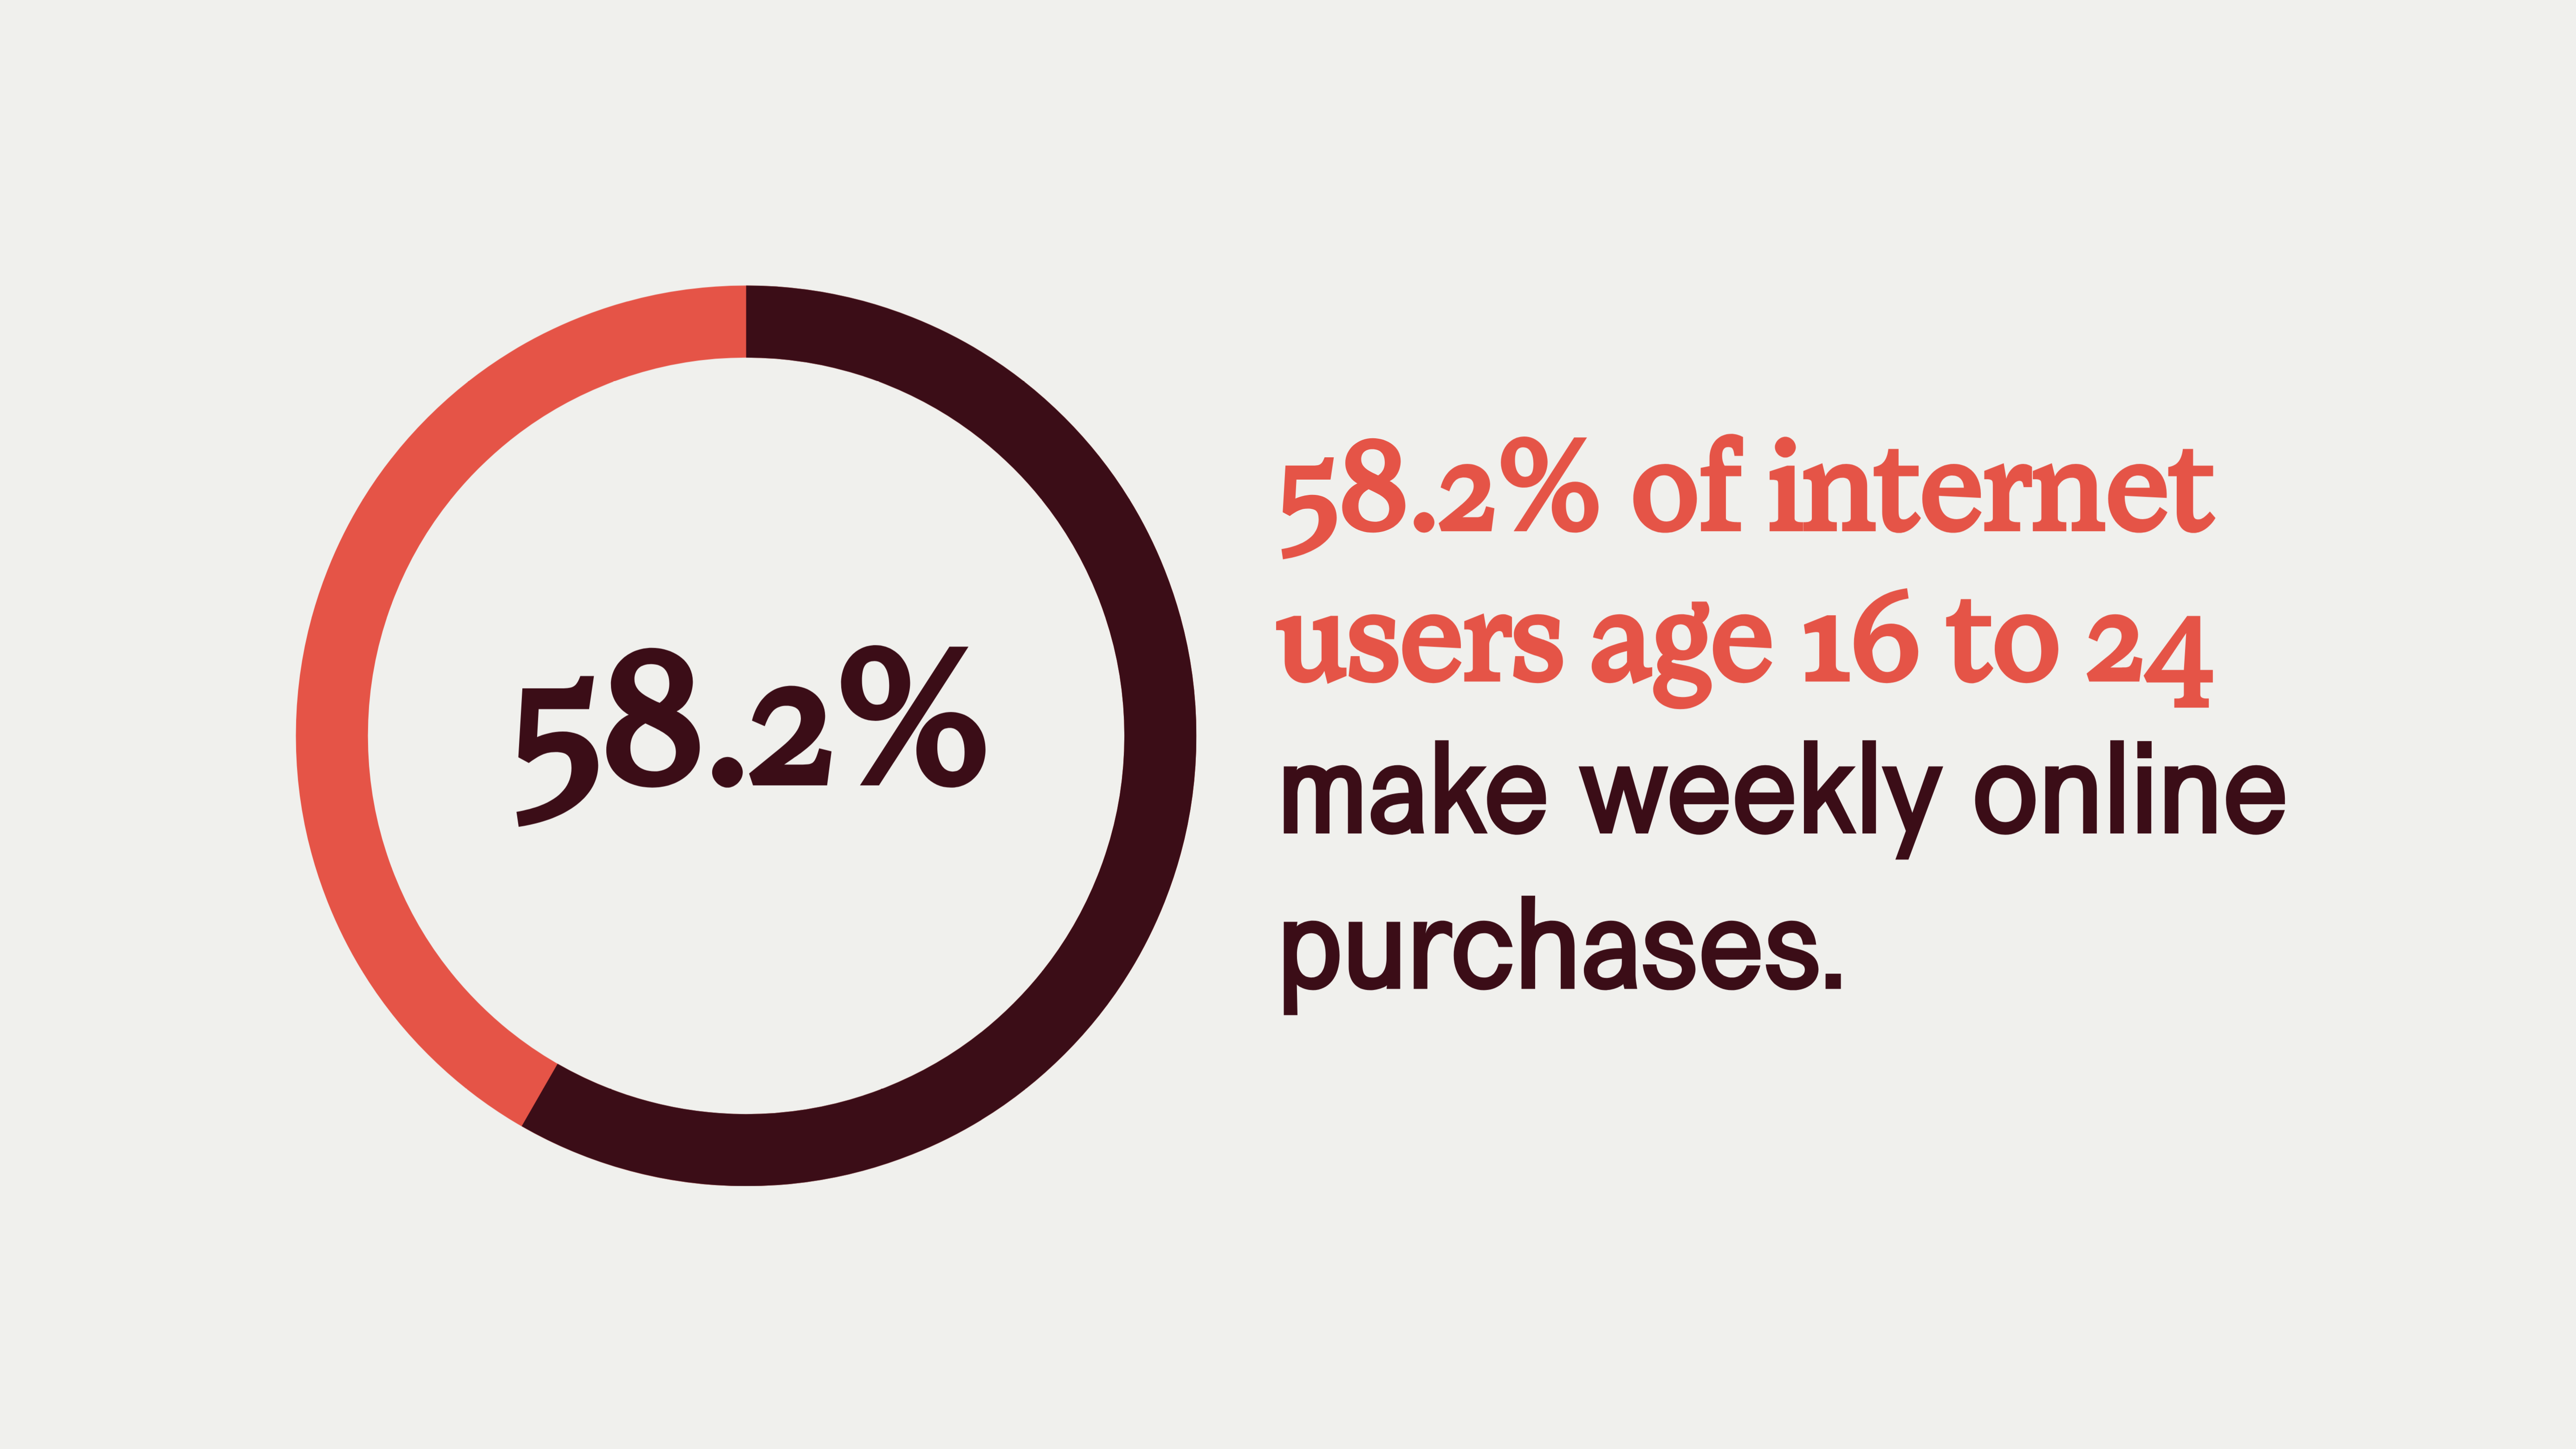 ecommerce stat: 58.2% of internet users aged 16 to 24 make an online purchase every week 